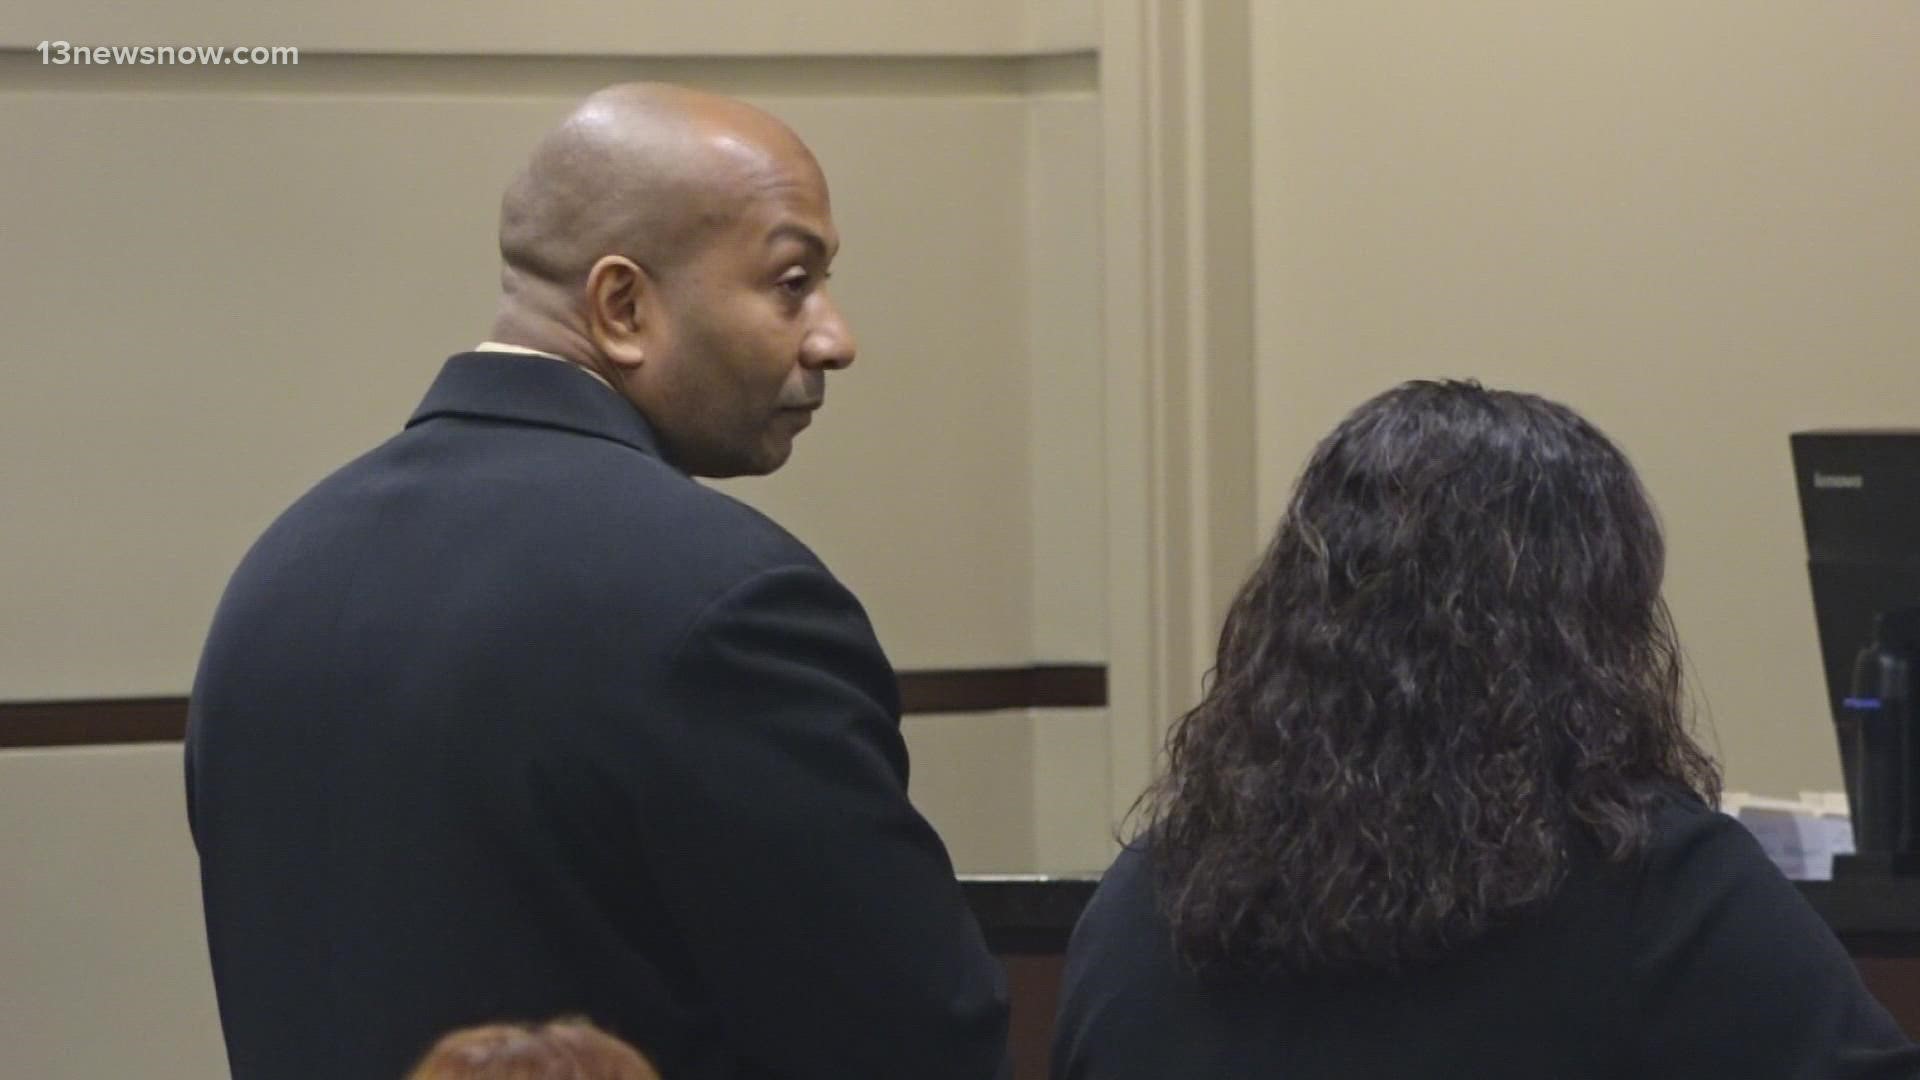 The judge's ruling comes months after Interim Police Chief Stephen Jenkins released body camera footage showing an incident involving Det. Mario Hunter on Oct. 13.